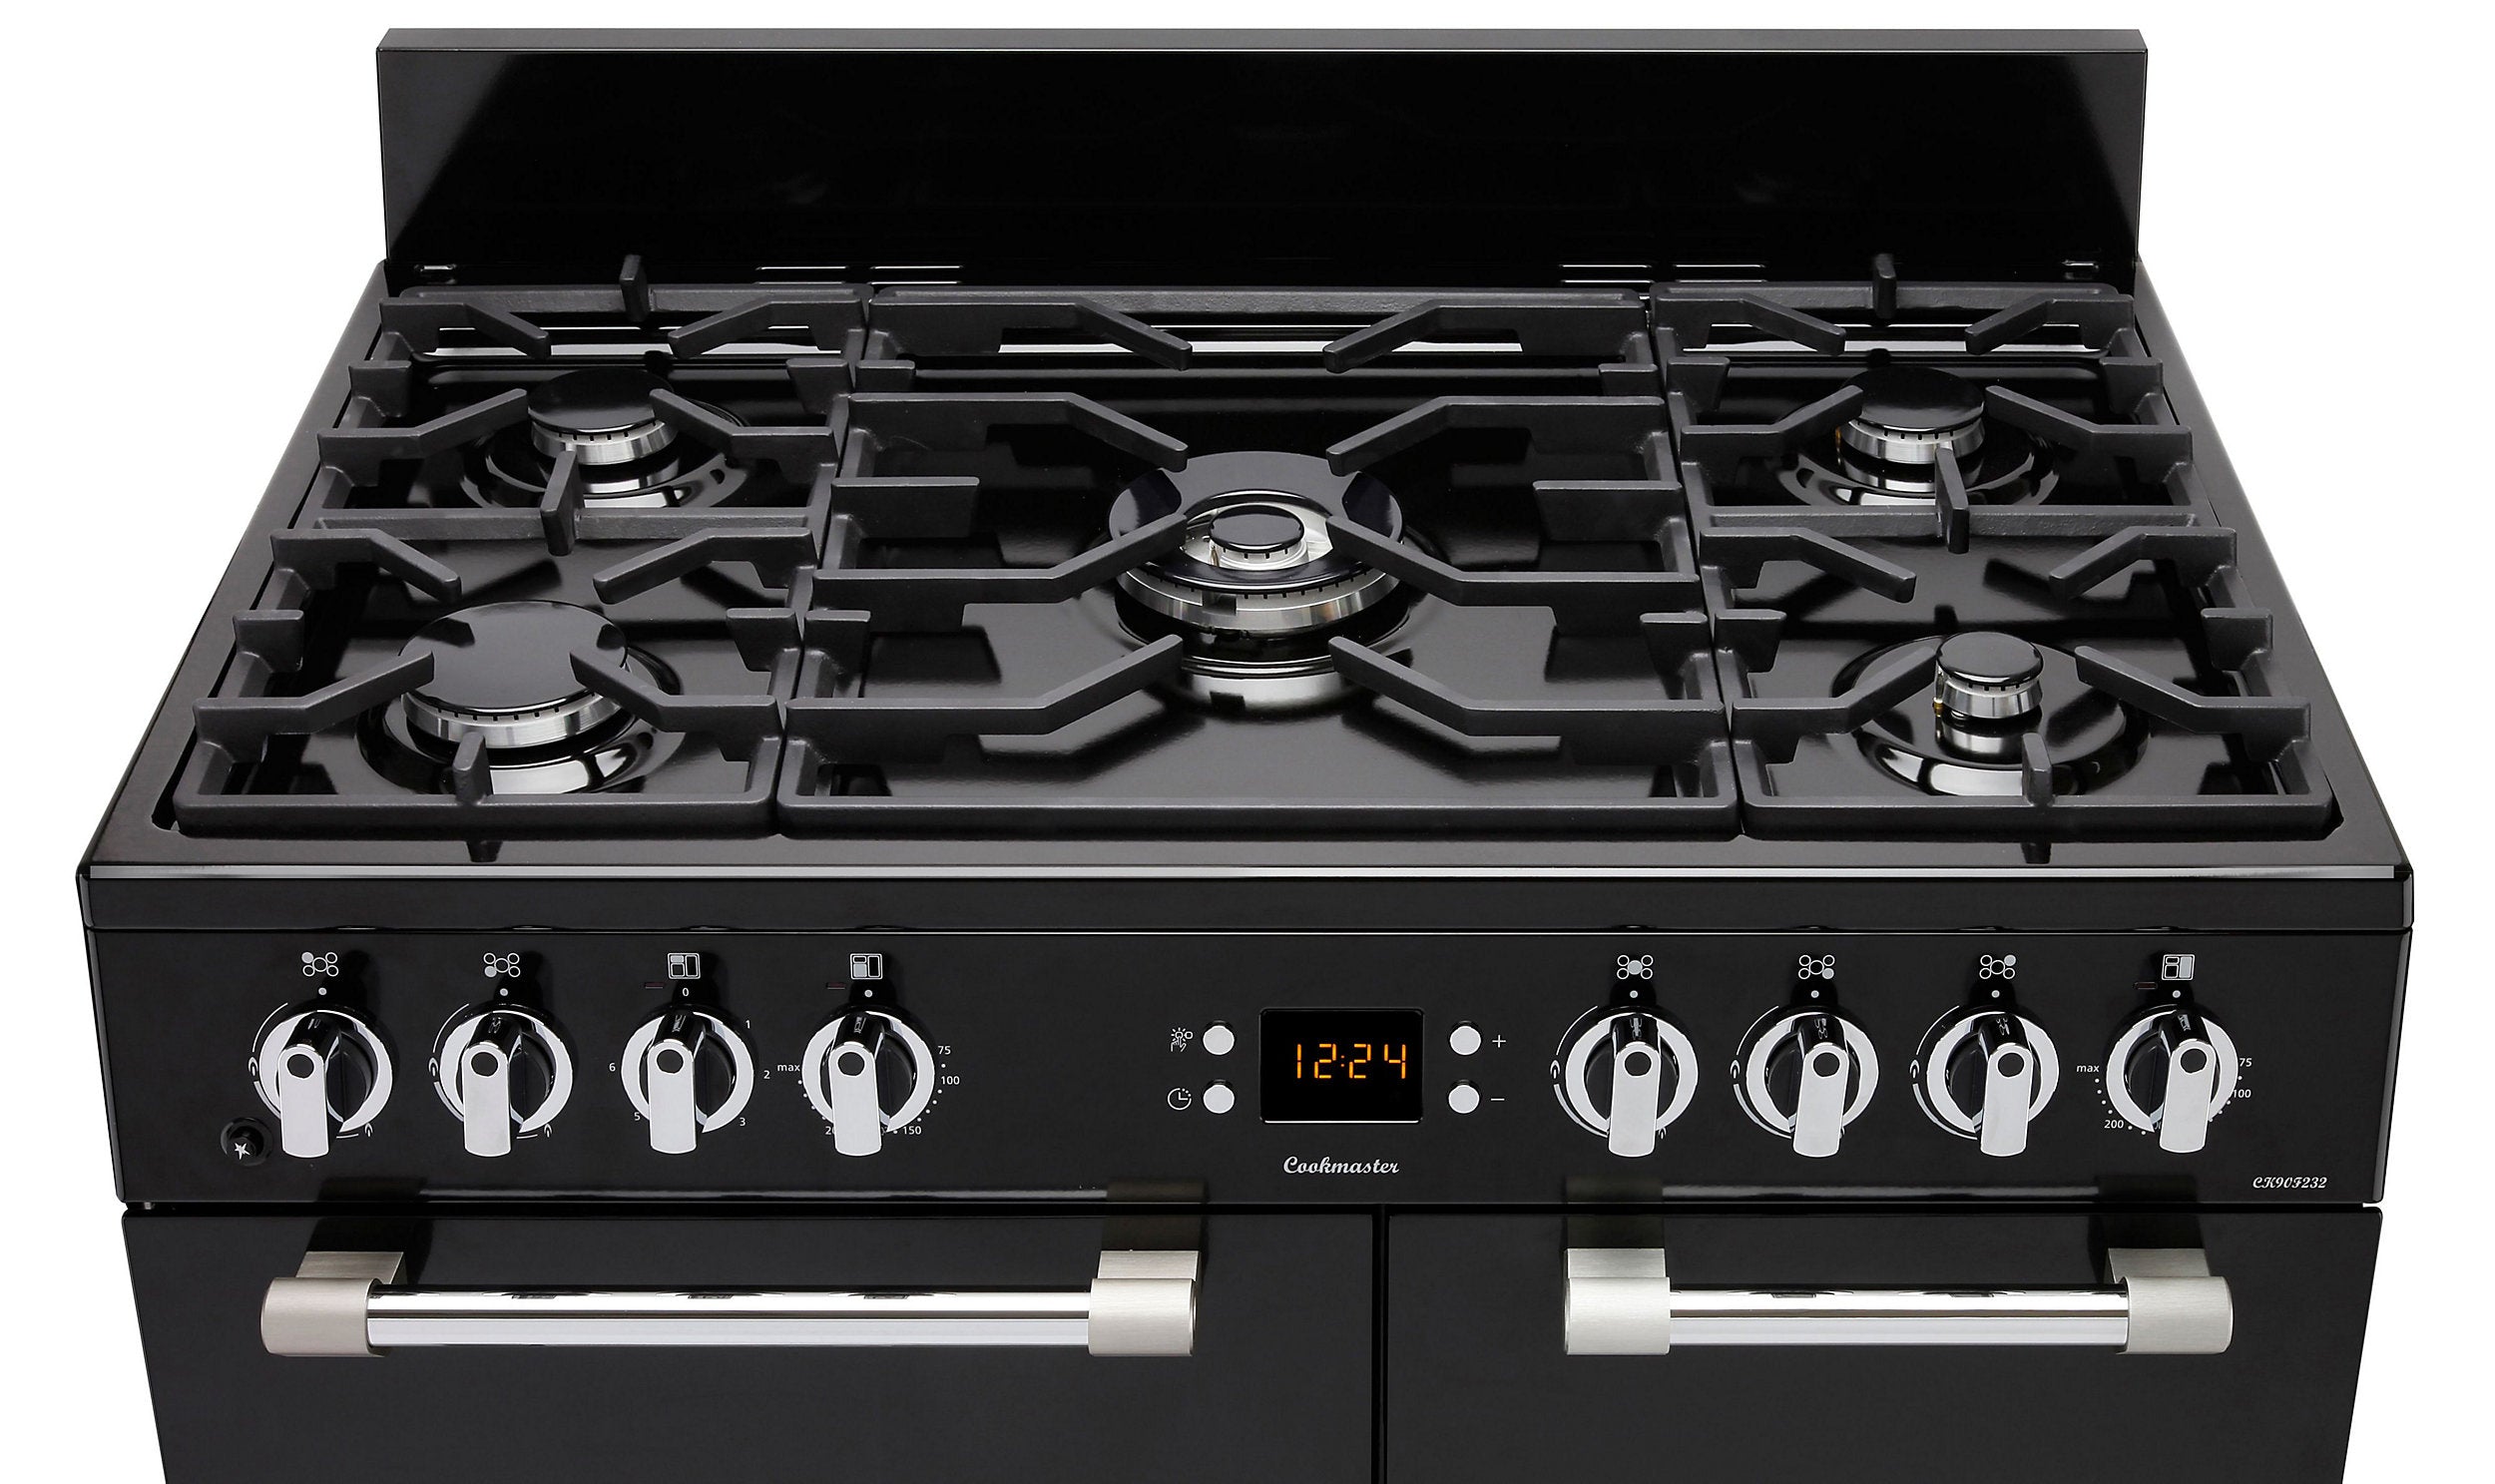 Leisure cooker with Gas Hob-Electric-Freestanding-Black-CK90F232K-2742